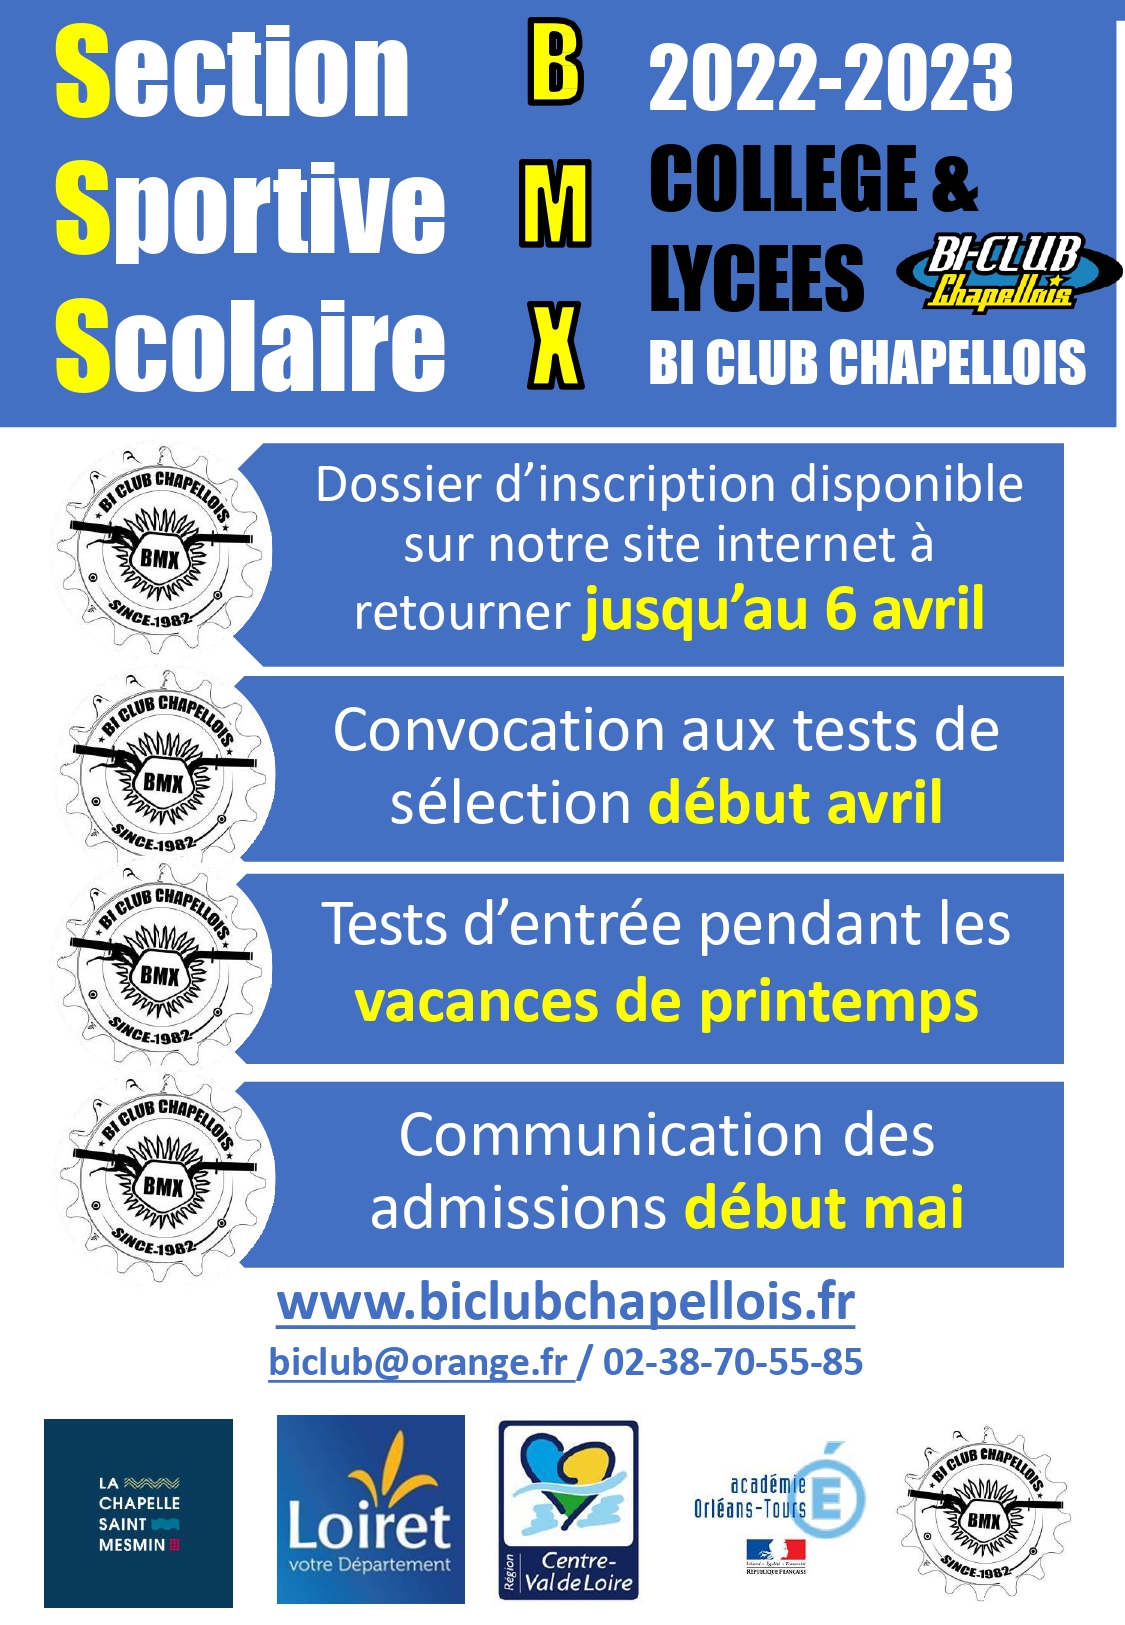 flyer section sportive (1)_page-0002